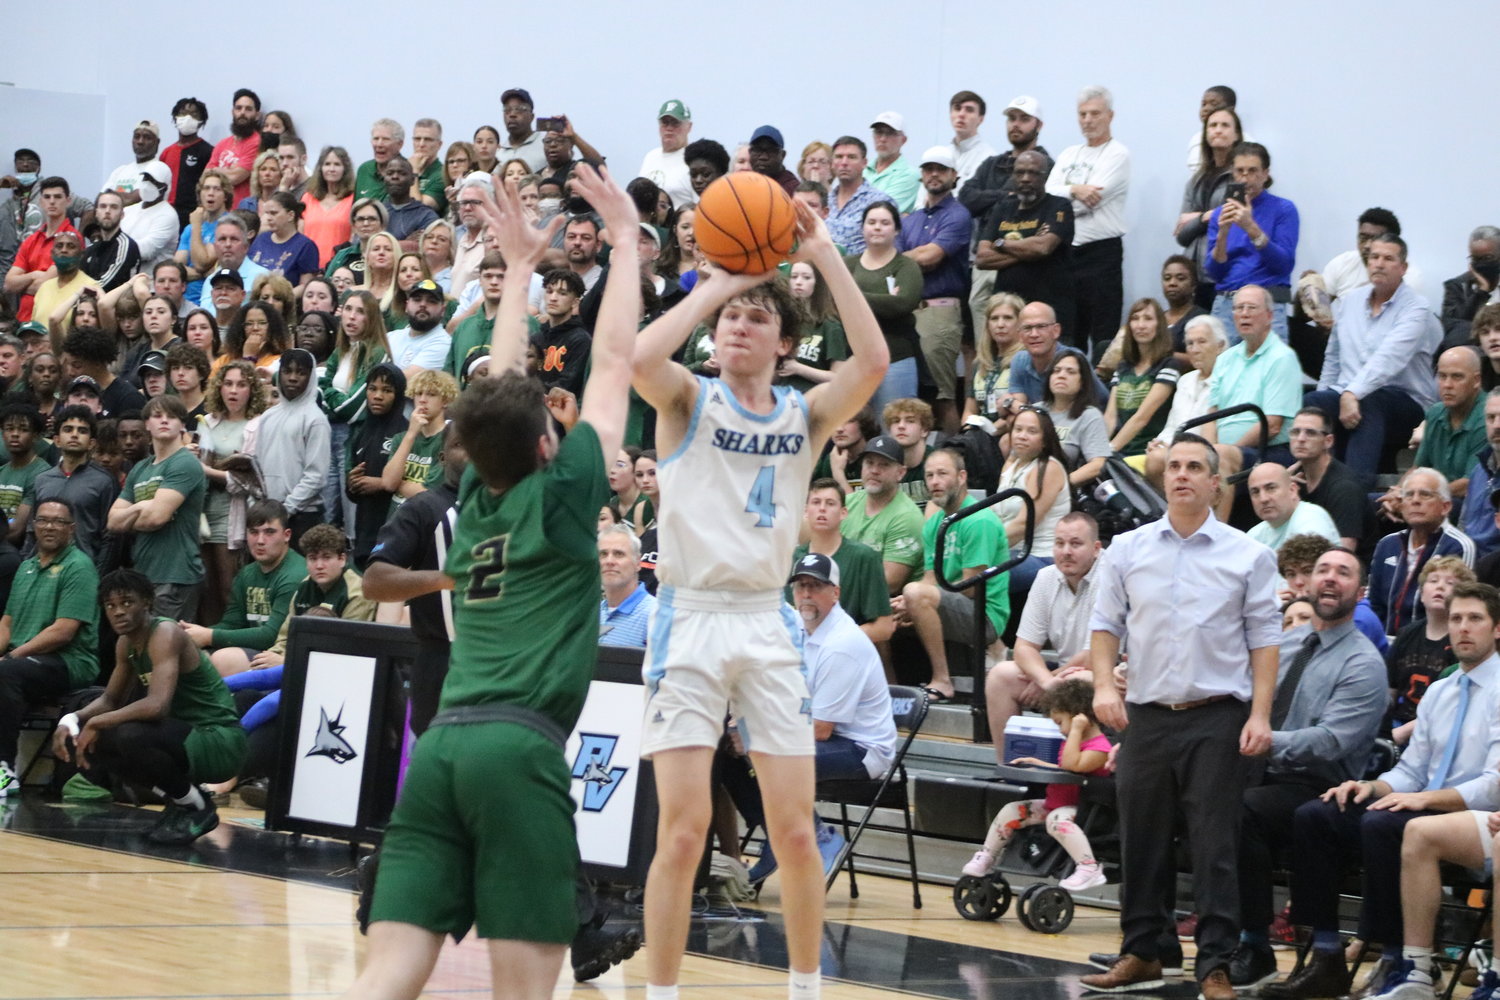 J.T. Kelly launches a three-pointer. He had 12 points in the regional championship.